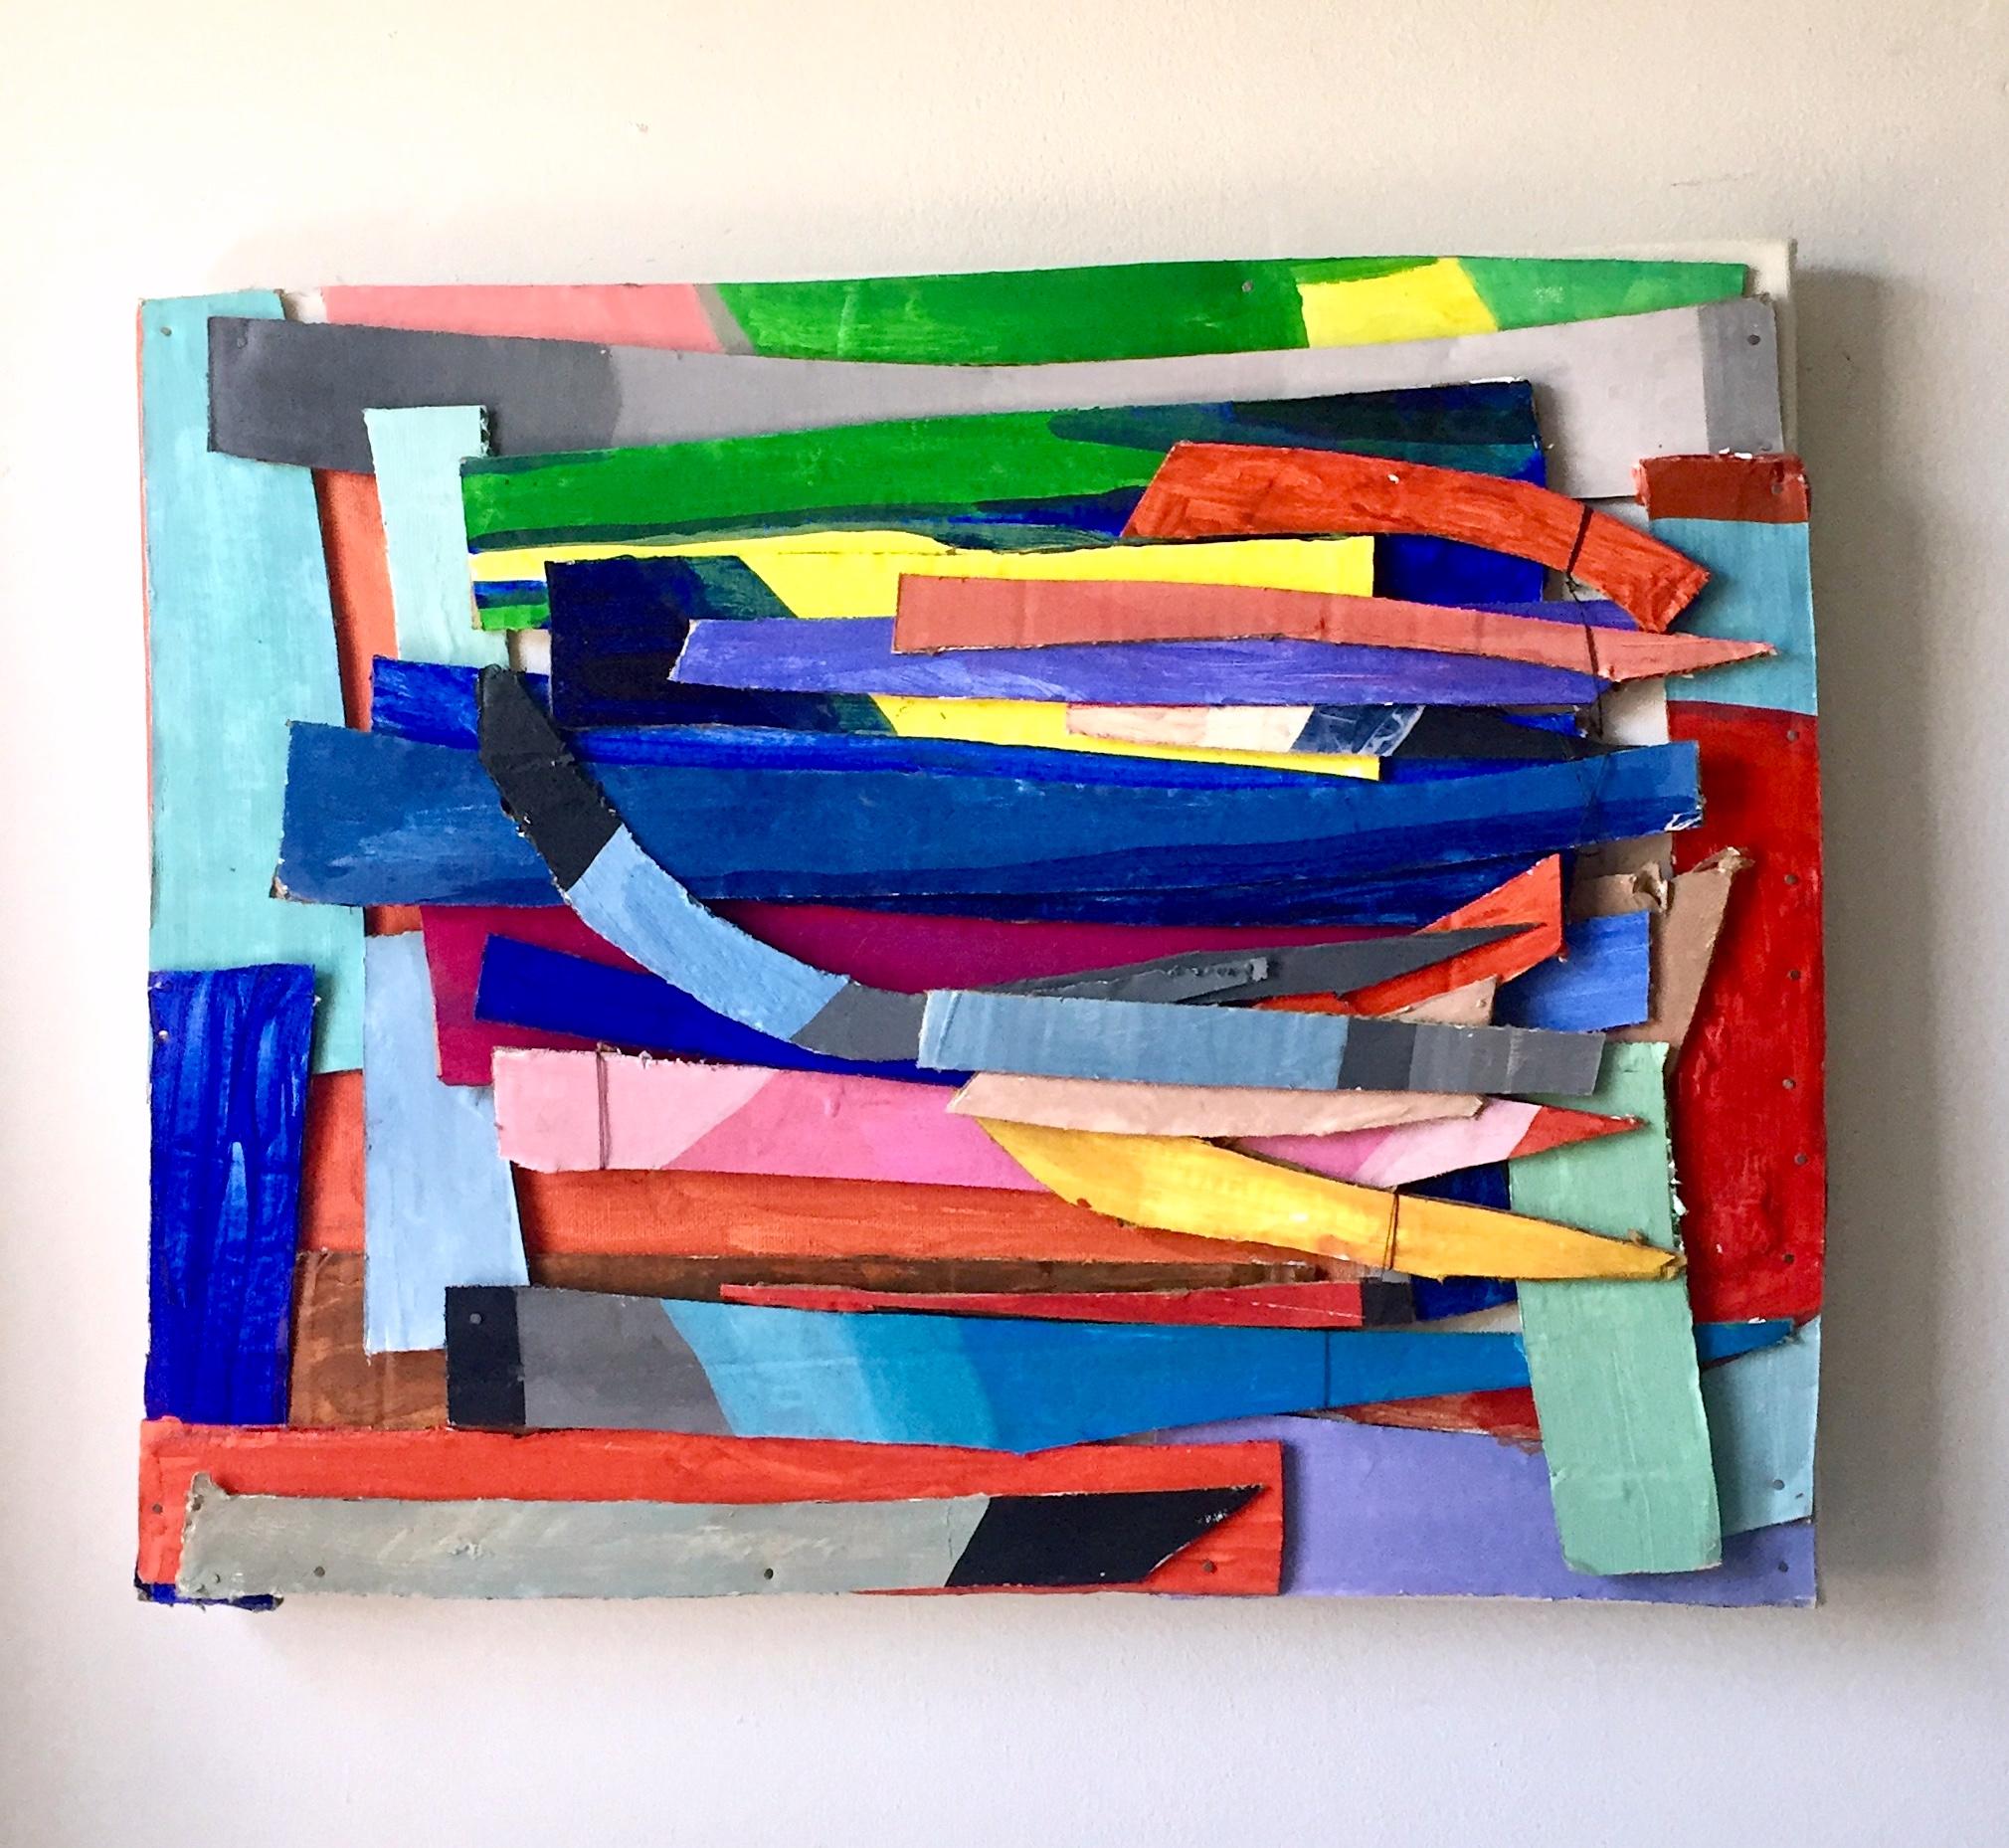 Colorful Painted Cardboard Collage on Canvas Pile in relief w/ Thread 16x20 inch - Painting by Nina Bovasso